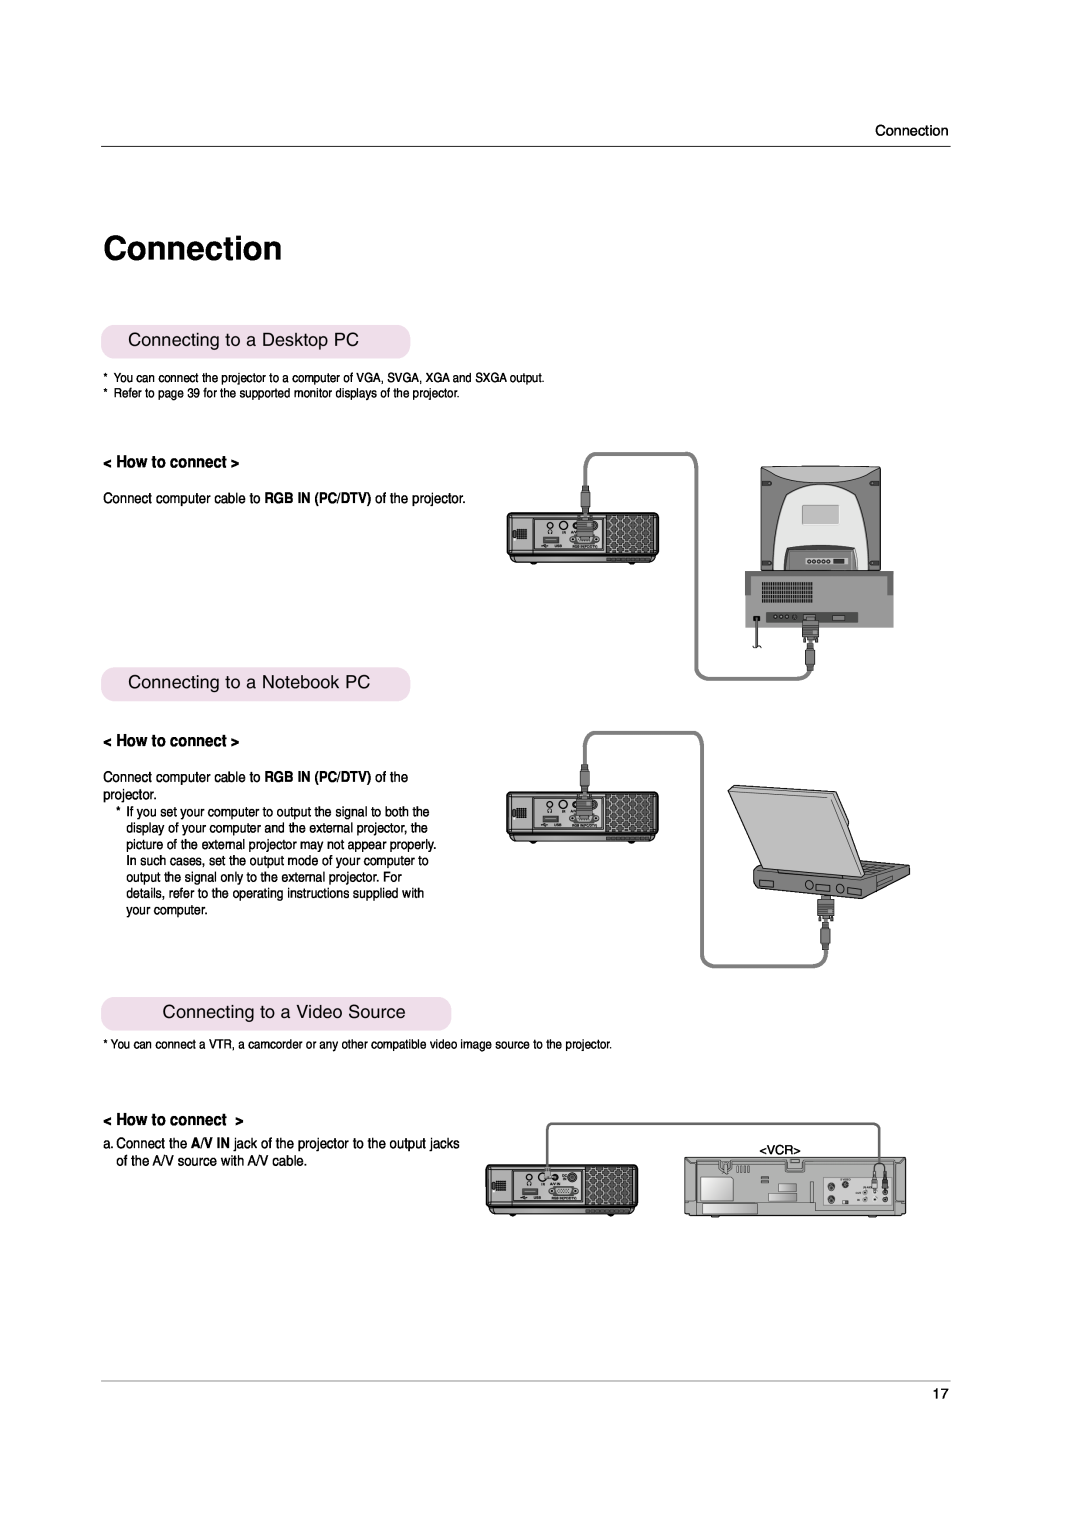 LG Electronics HS102 Connection, Connecting to a Desktop PC, Connecting to a Notebook PC, Connecting to a Video Source 